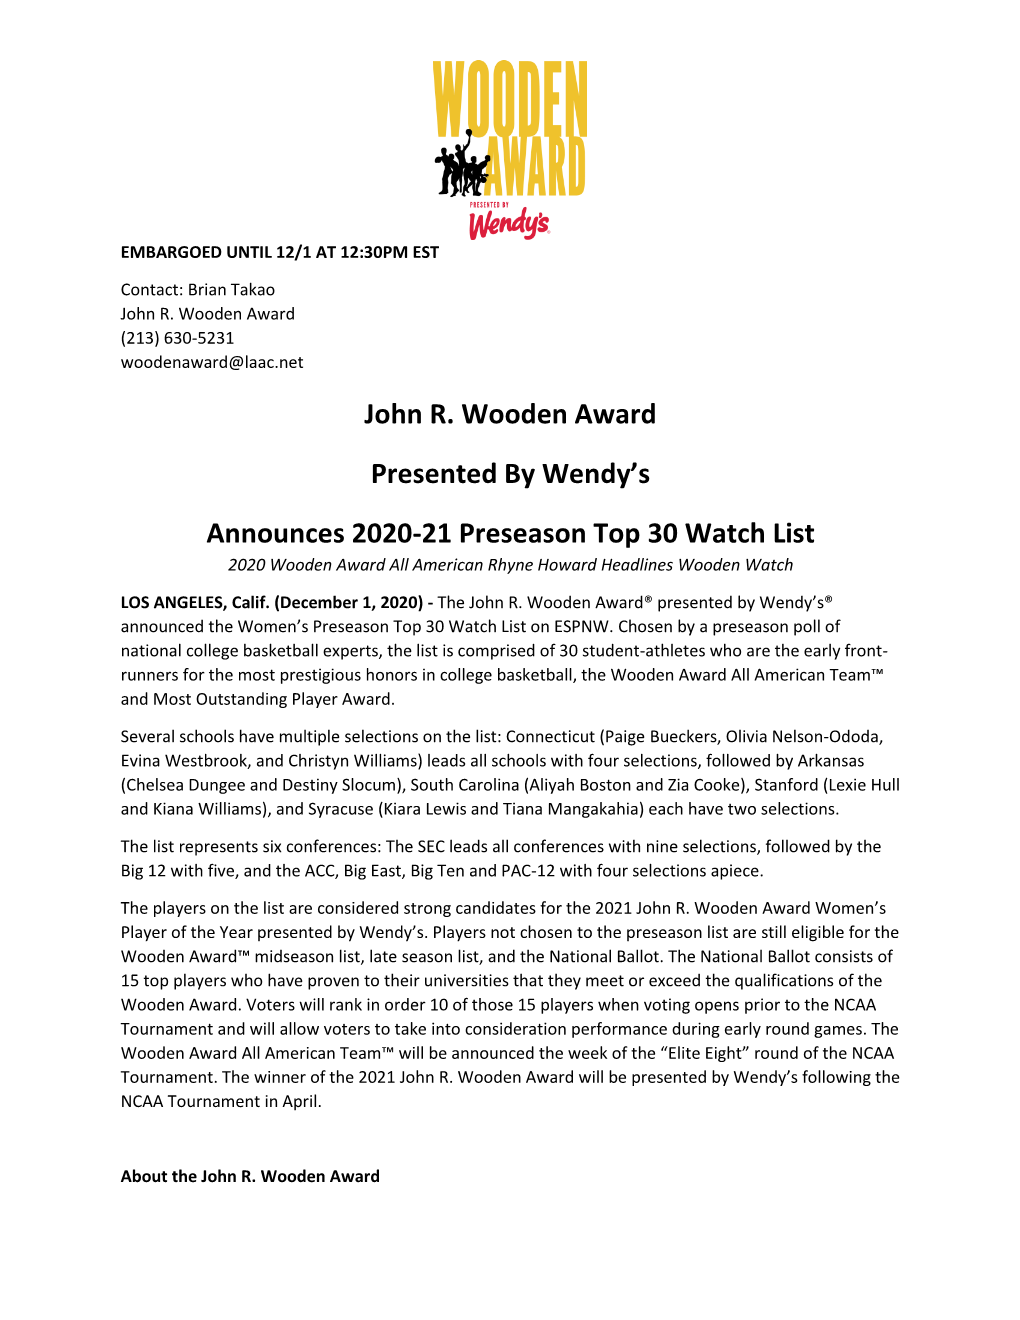 John R. Wooden Award Presented by Wendy's Announces 2020-21